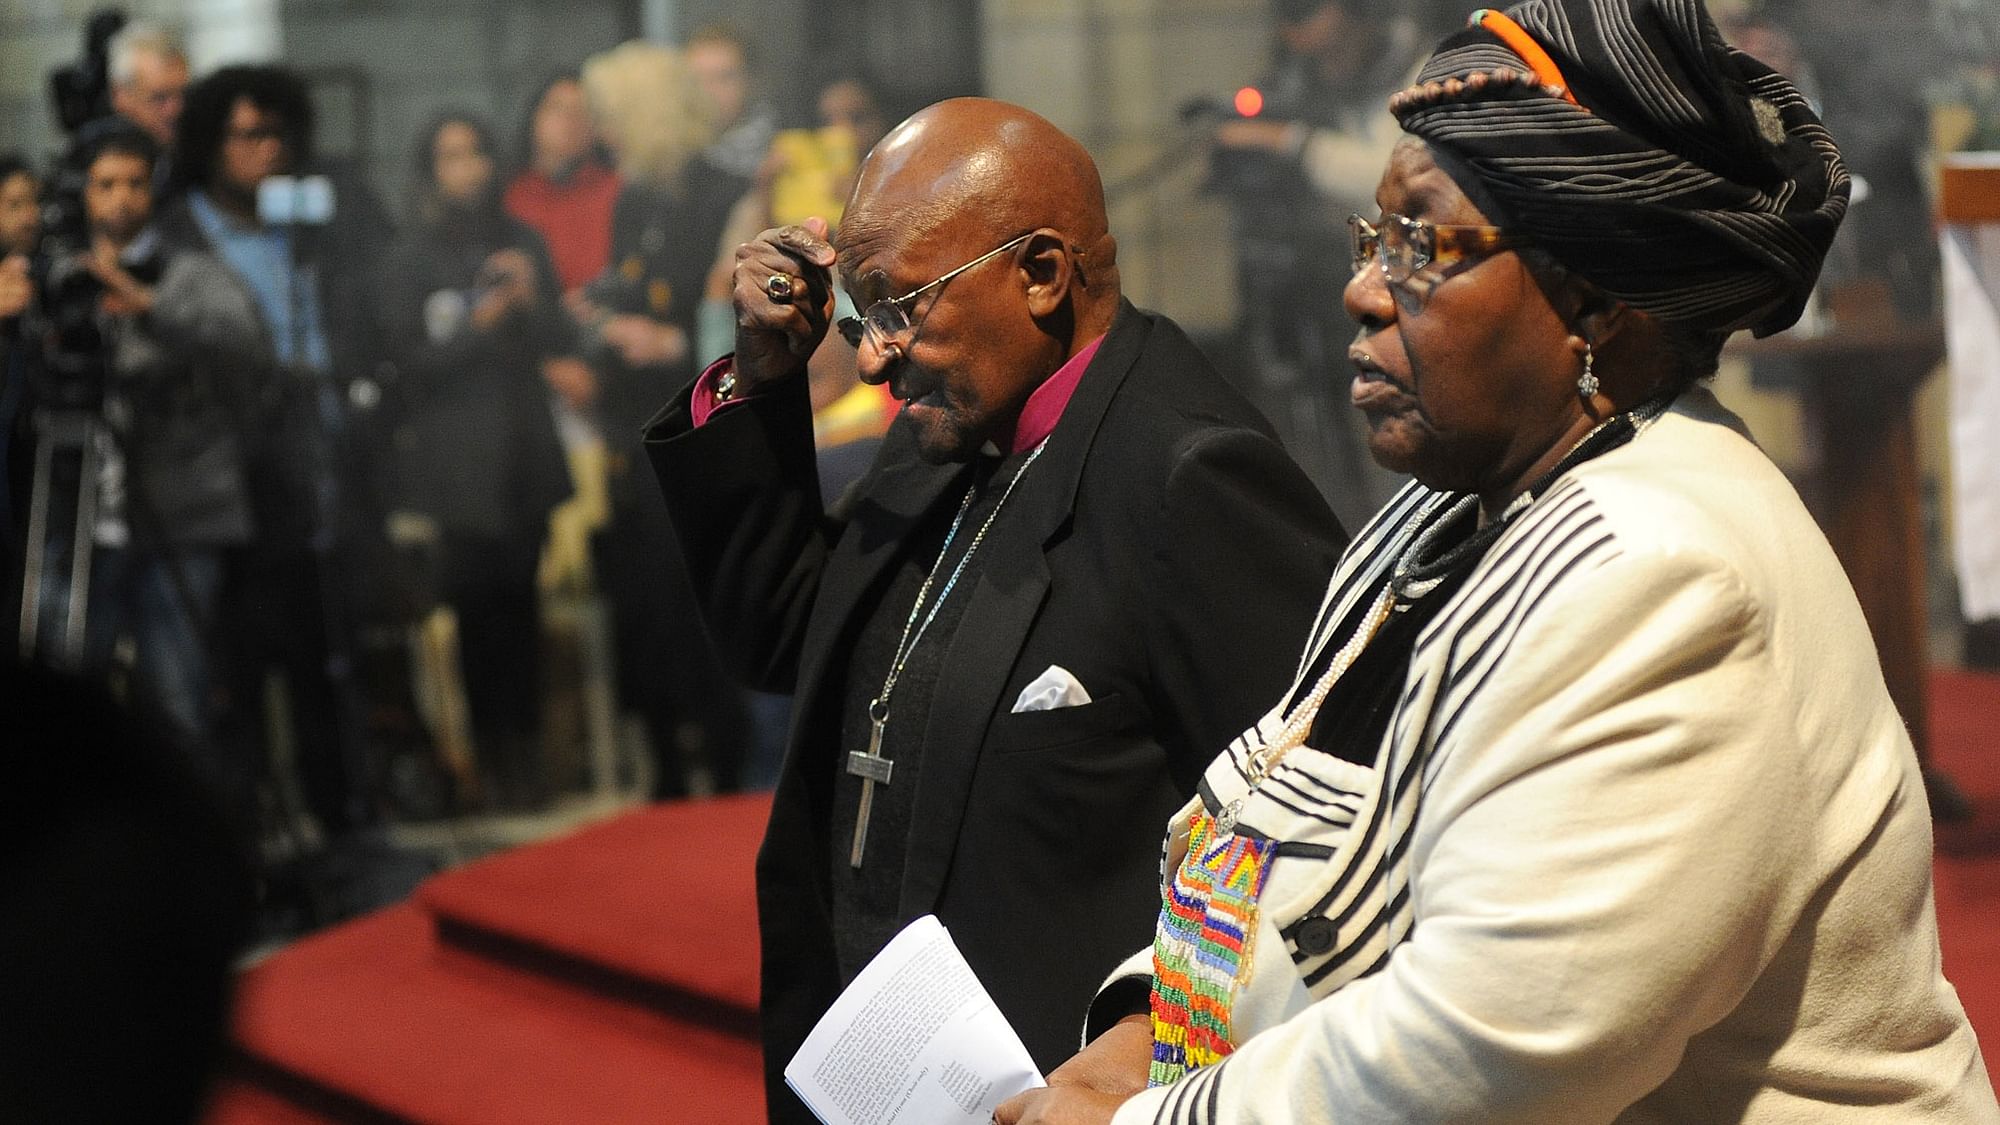 <div class="paragraphs"><p>The late South African Archbishop Desmond Tutu and his wife, Leah. Image used for representational purposes.</p></div>